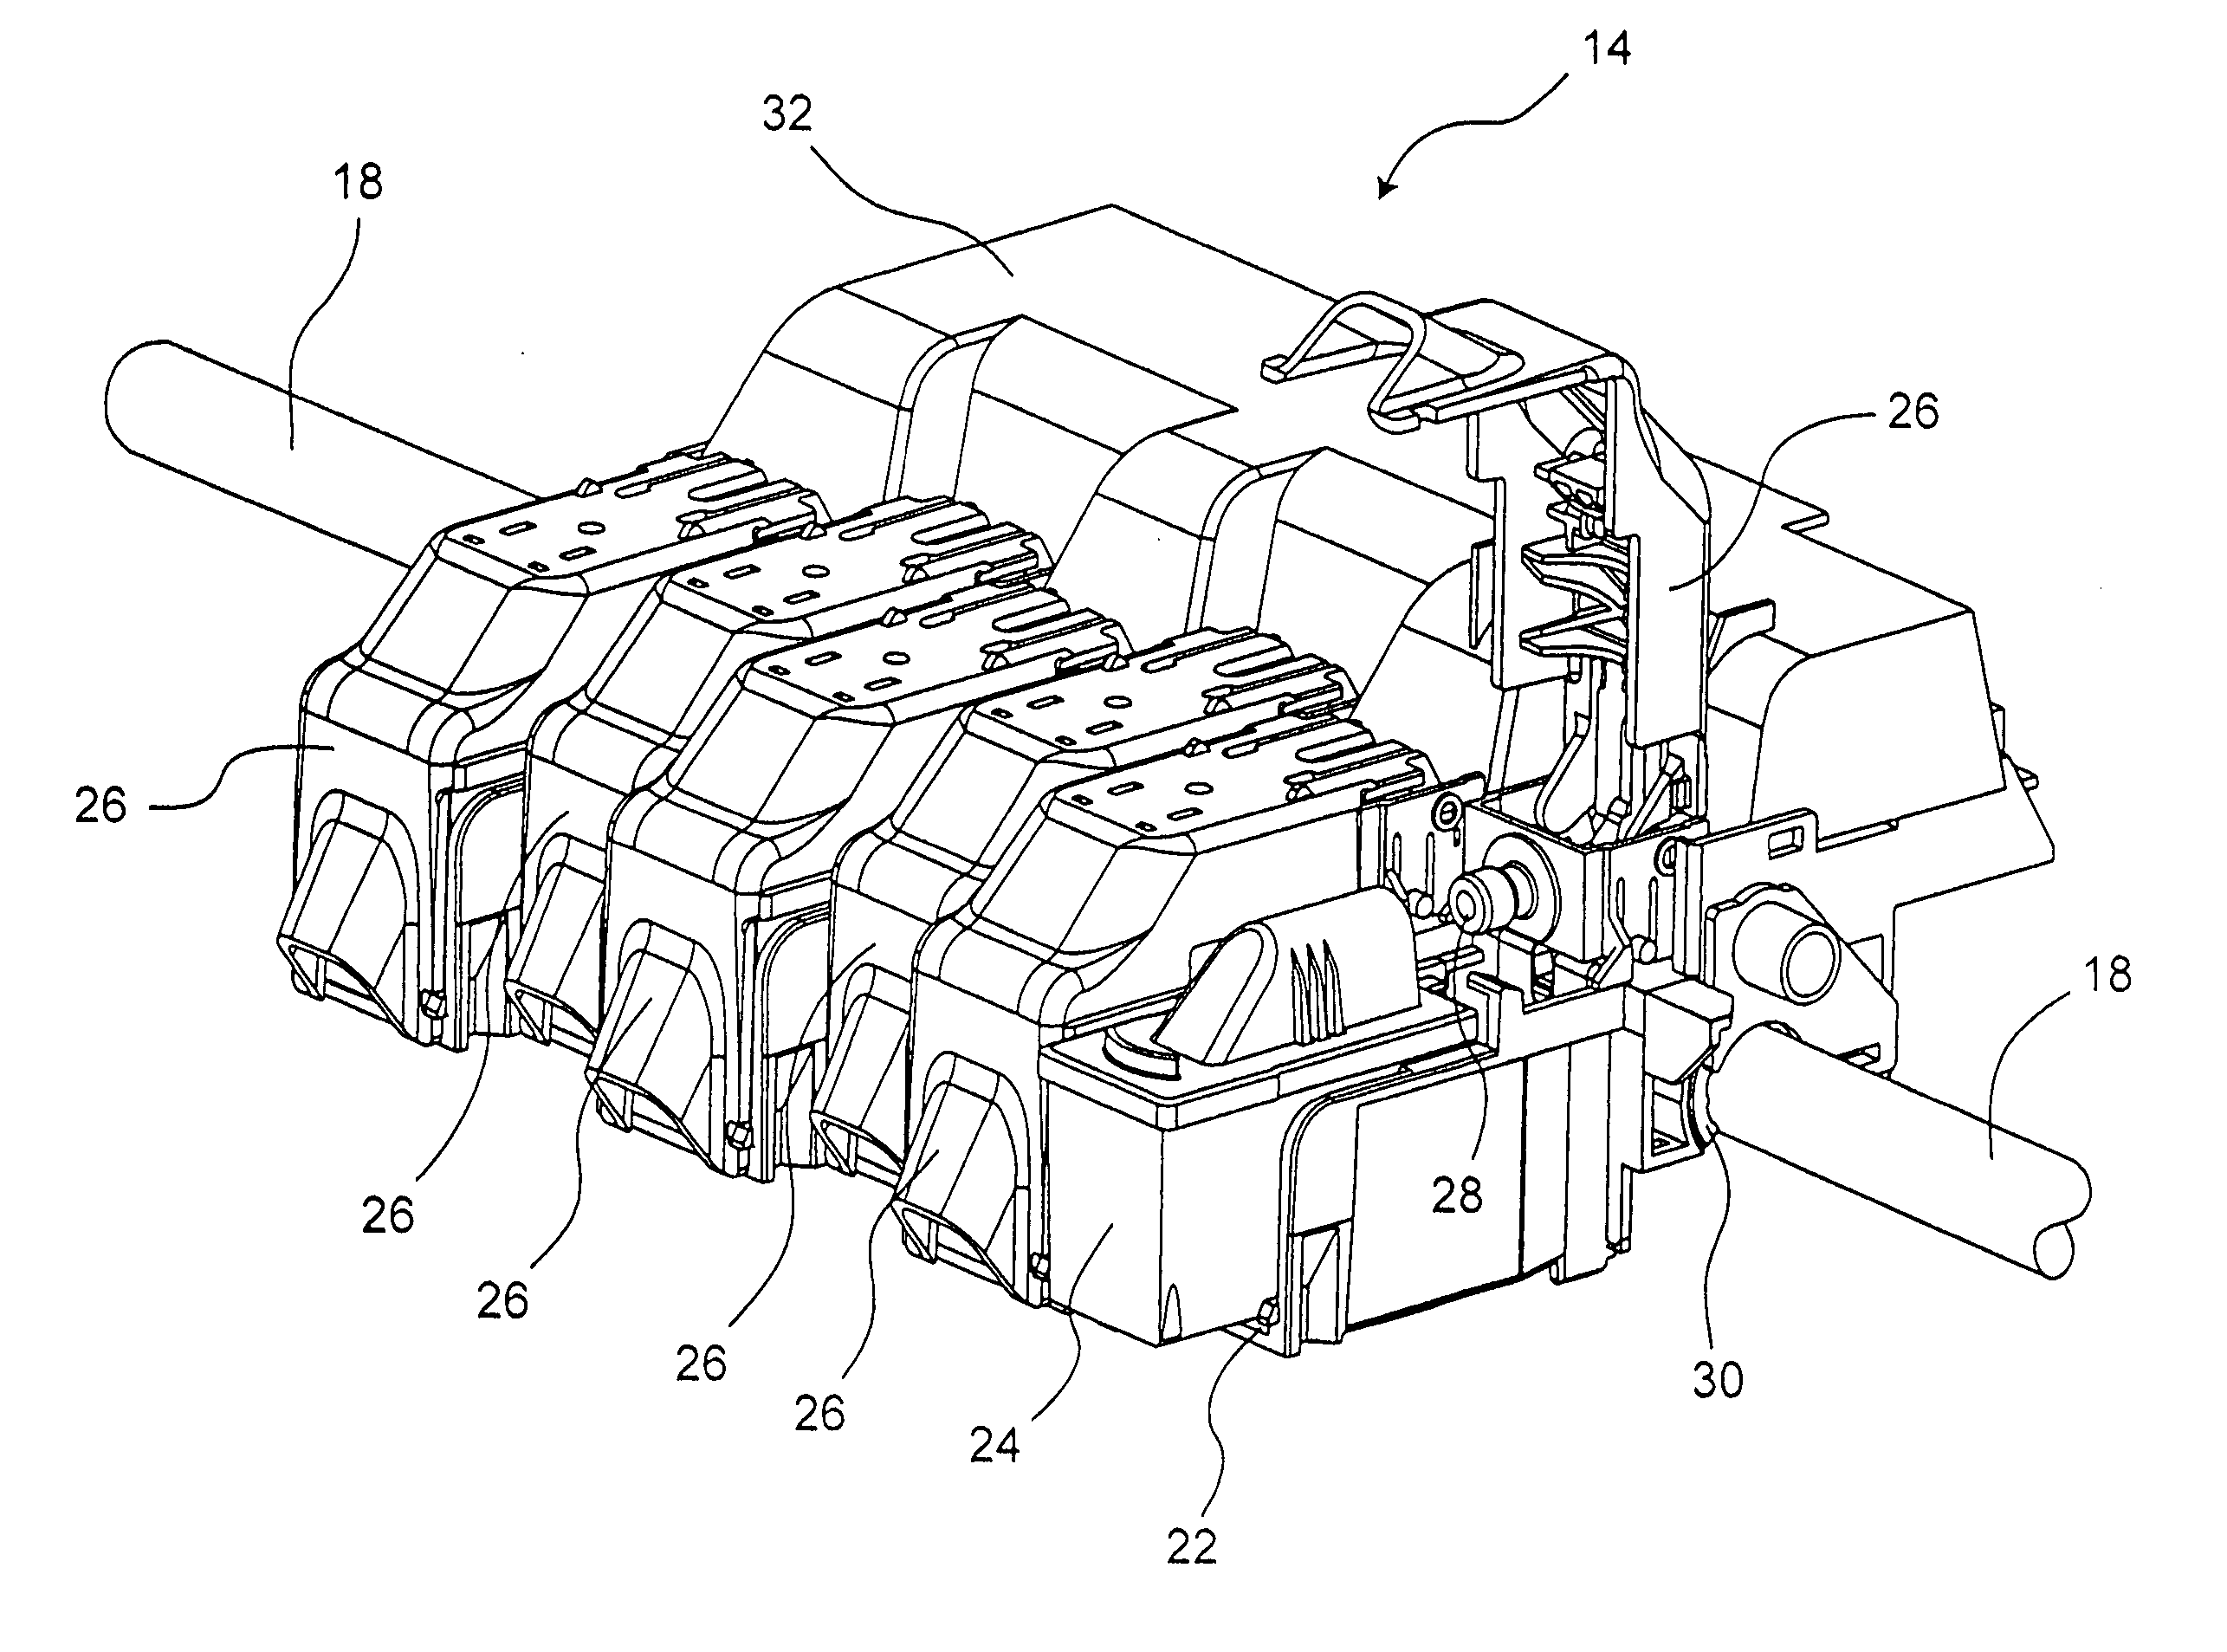 Ink delivery system apparatus and method